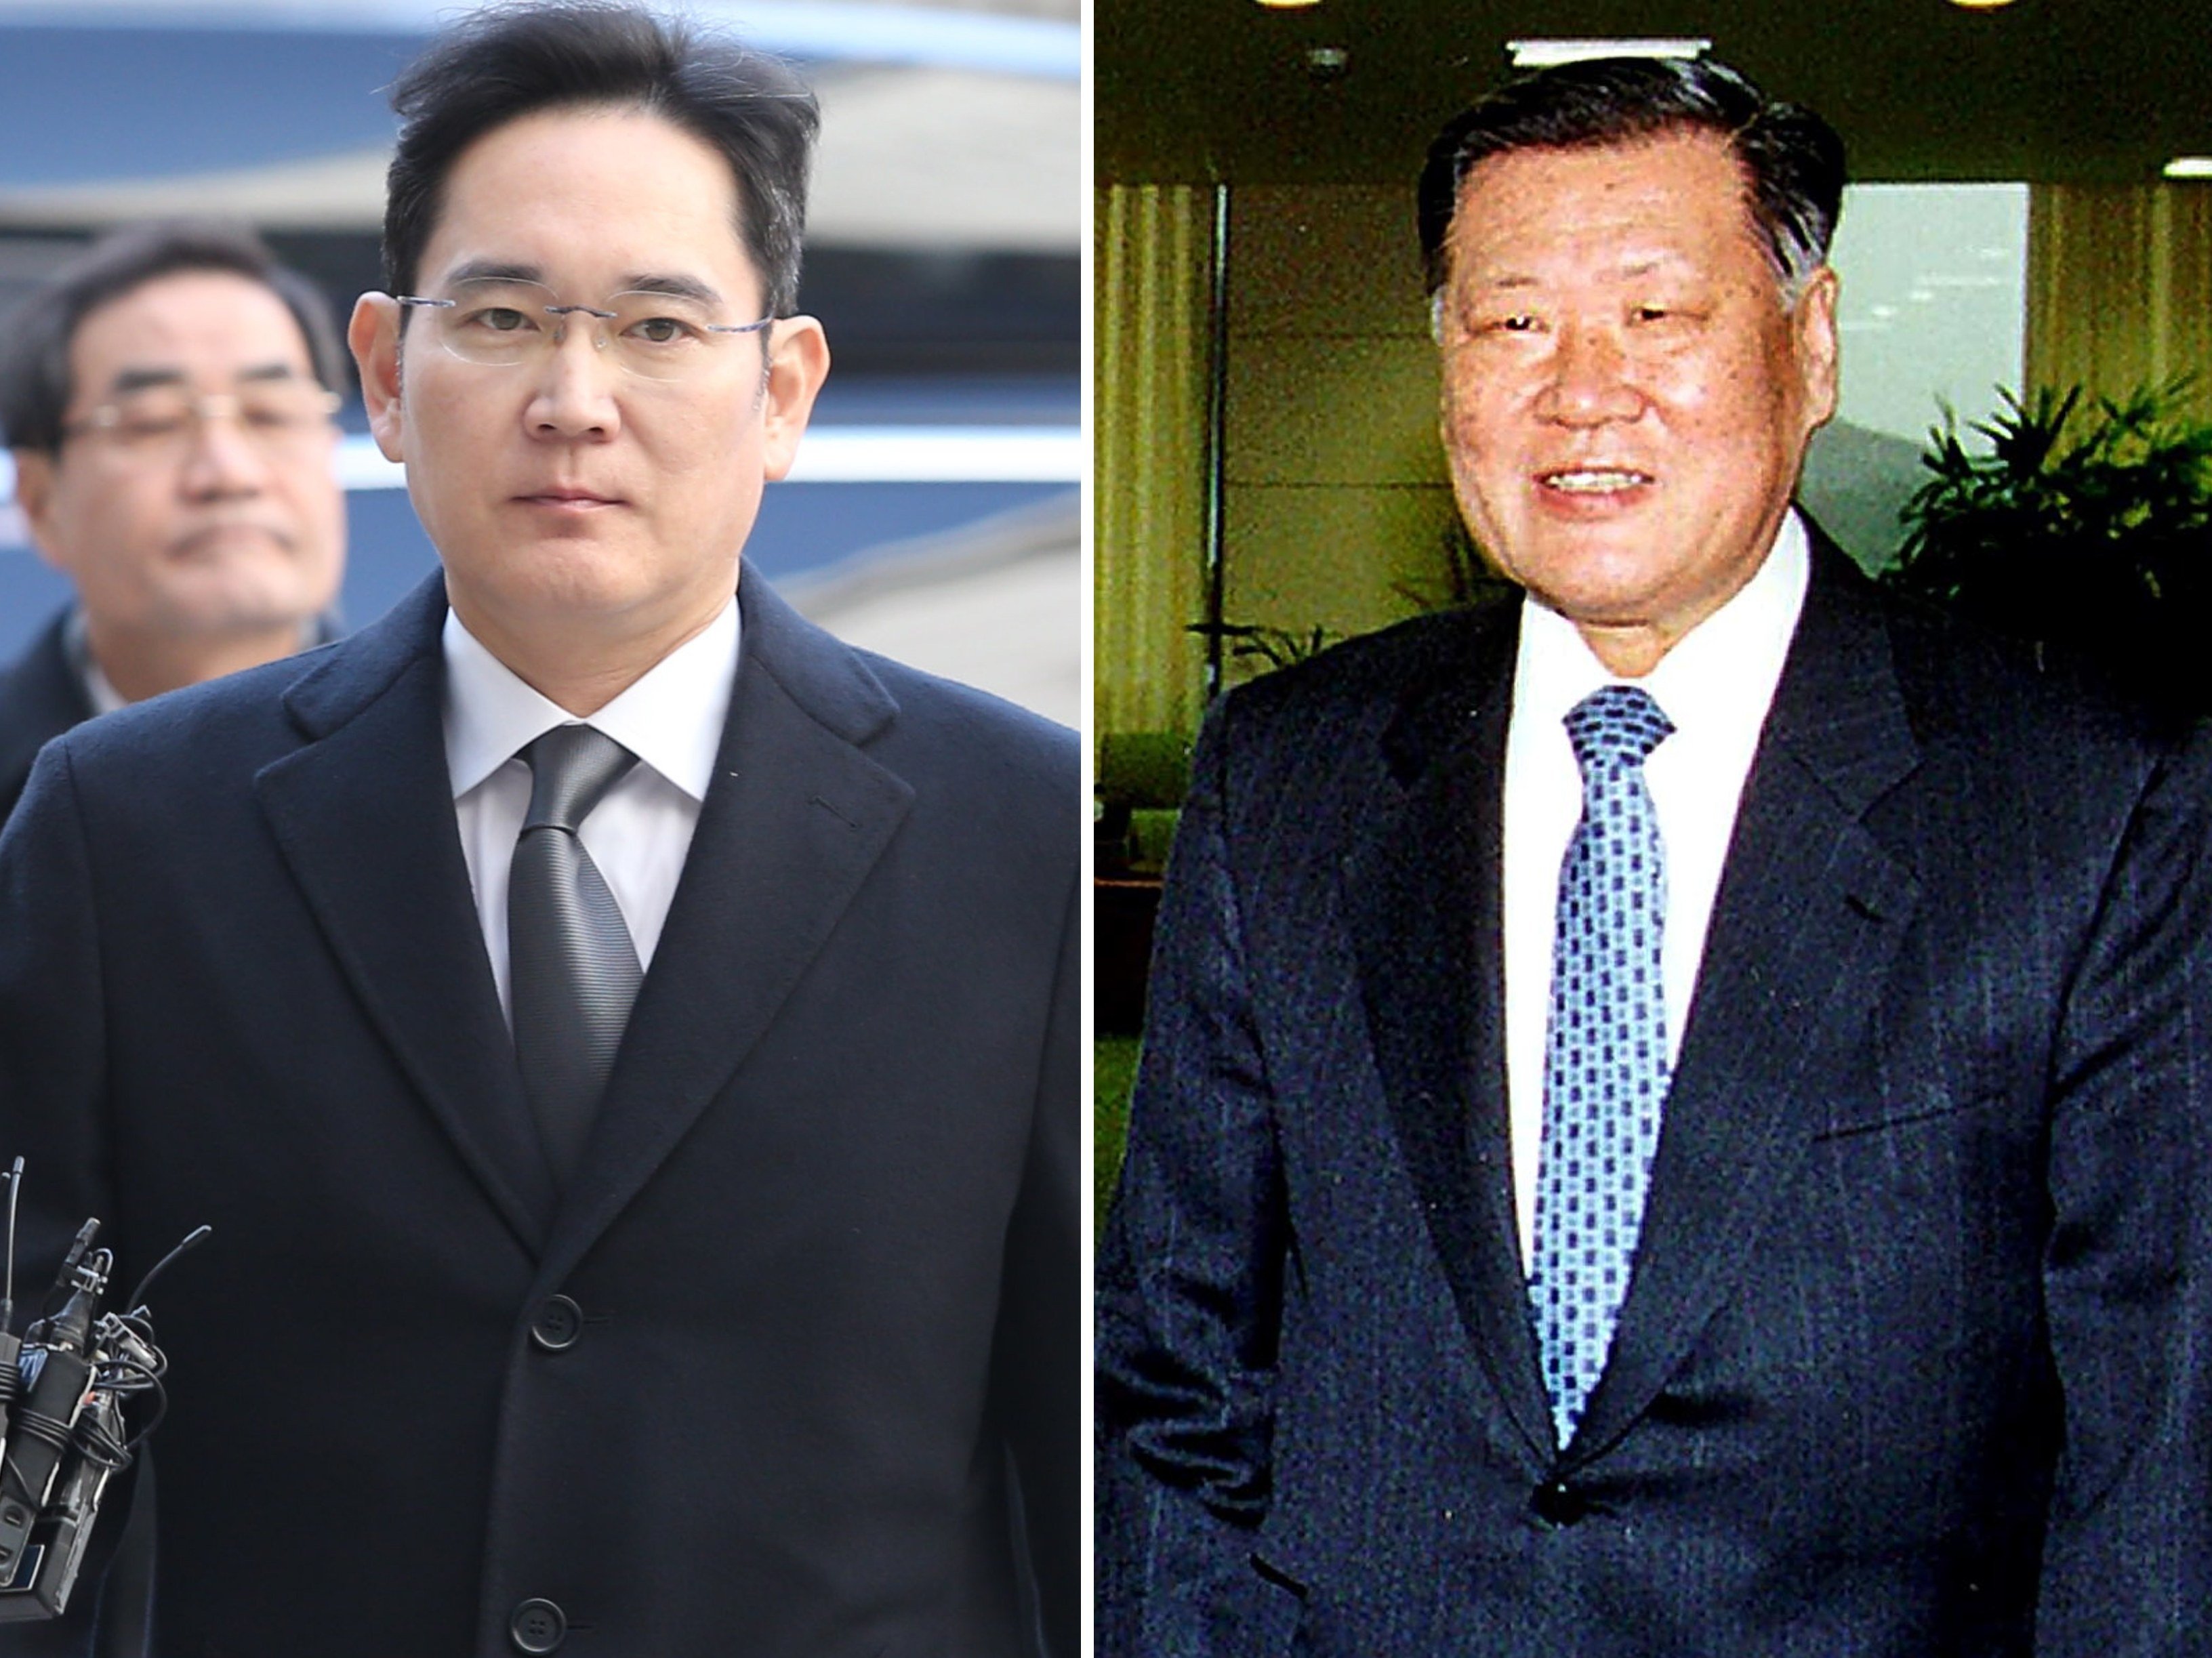 Samsung’s Lee Jae-yong and Hyundai’s Chung Mong-koo are two of the richest men in South Korea. Photos: AFP, EPA